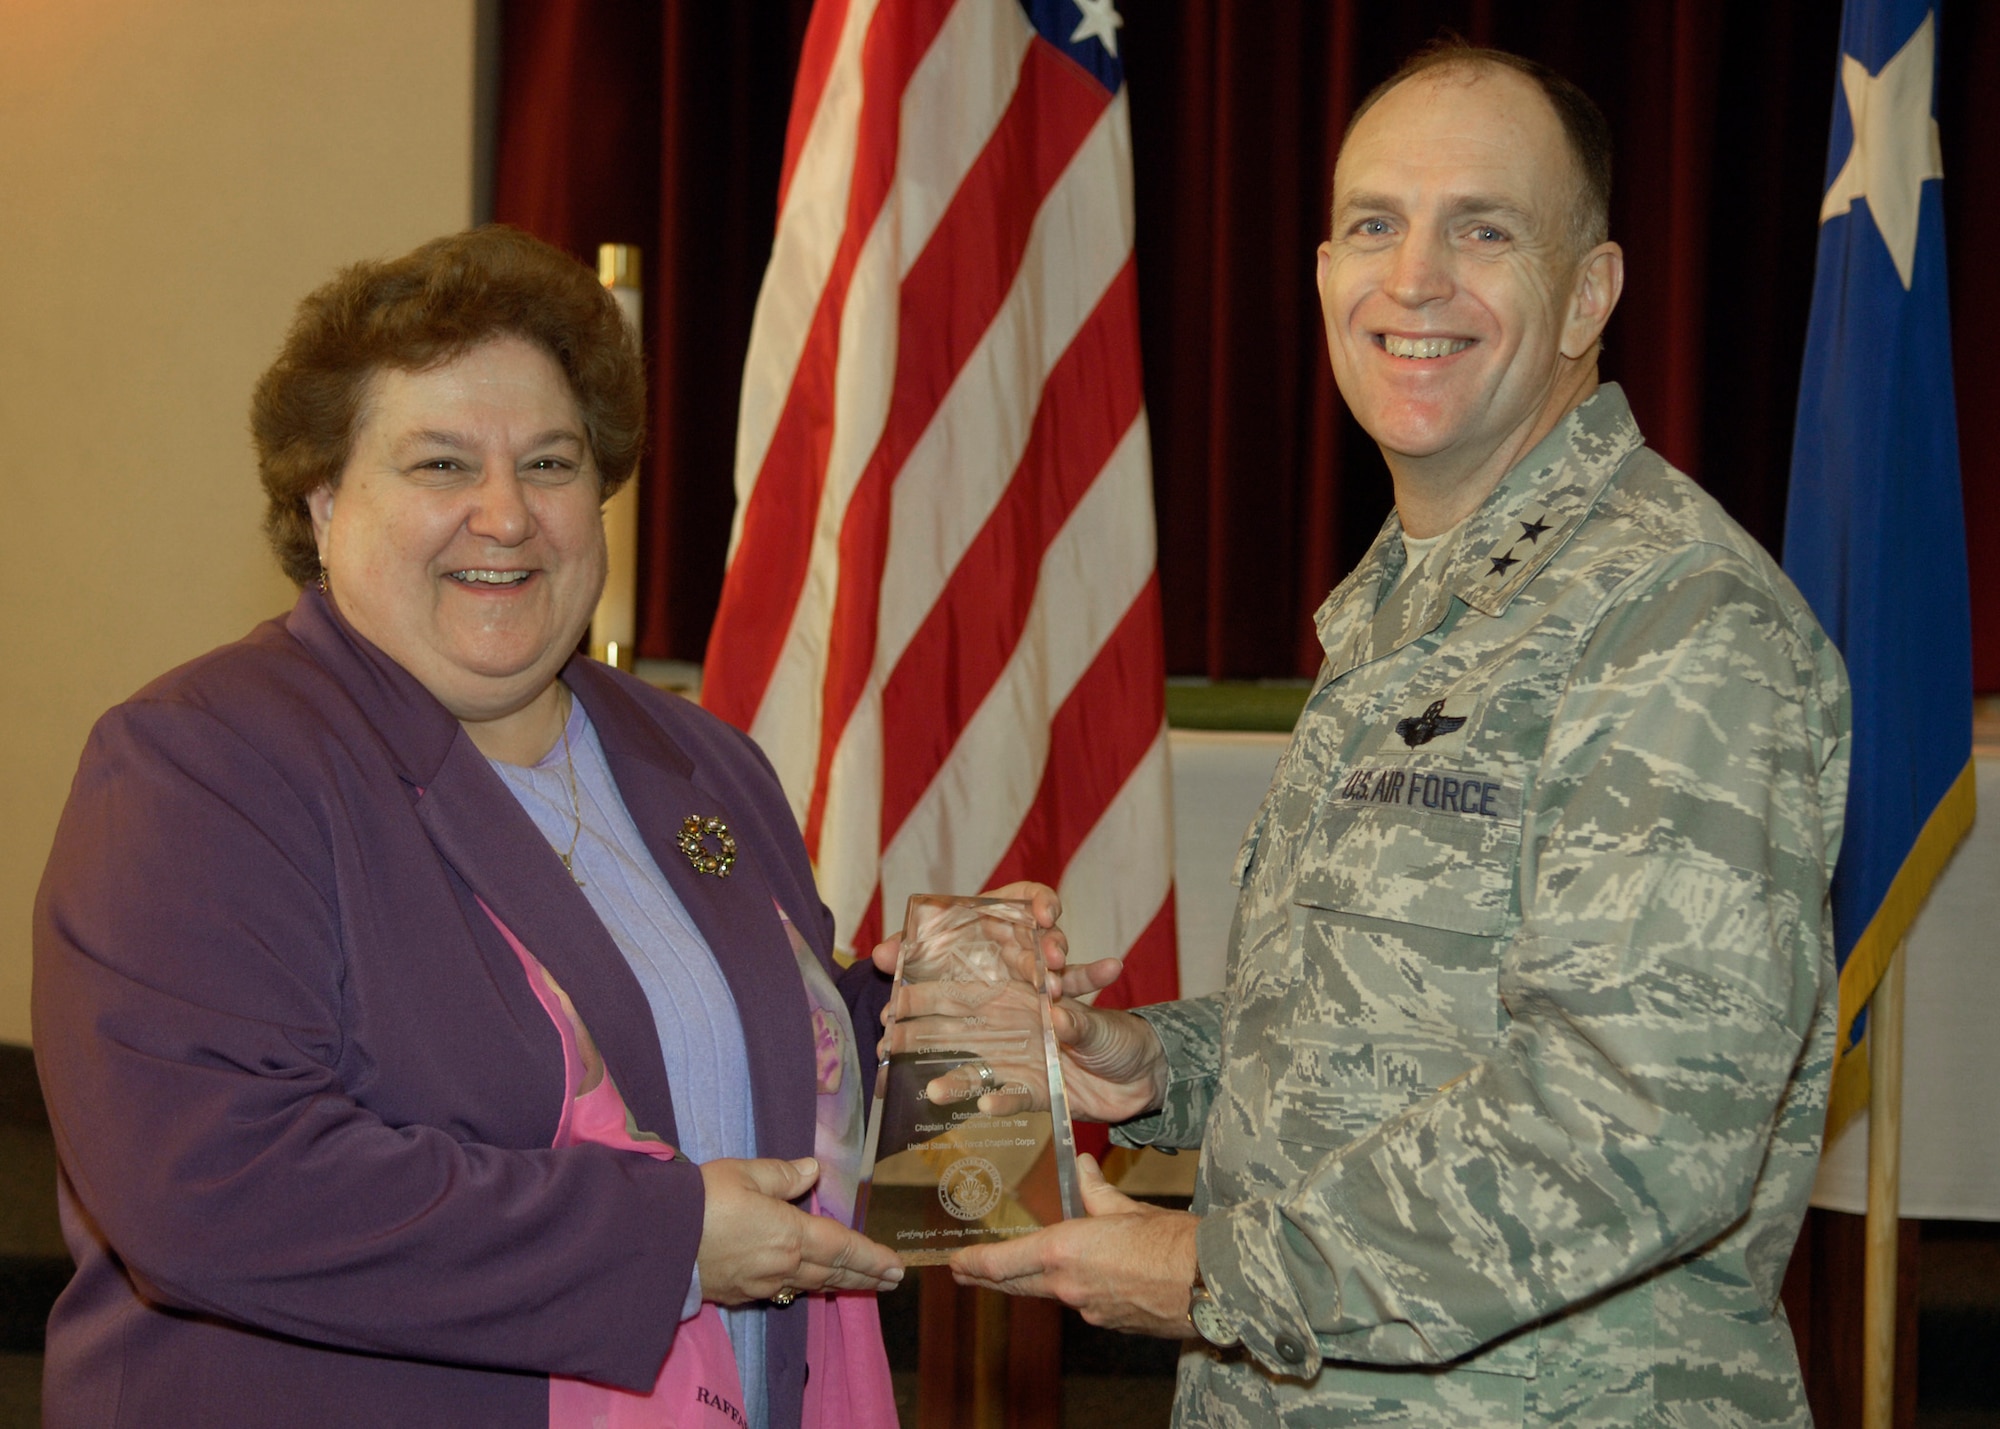 Maj. Gen. Ralph Jodice, Air Force District of Washington commander, presents the AFDW Oustanding Chaplain Corps Civilian Employee of the Year Award to Sister Mary Rita Smith. The award presentation took place Feb. 25, 2009, at the Andrews Air Force Base, Md., chapel.  (U.S Air Force photo by Senior Airman Renae Kleckner.)